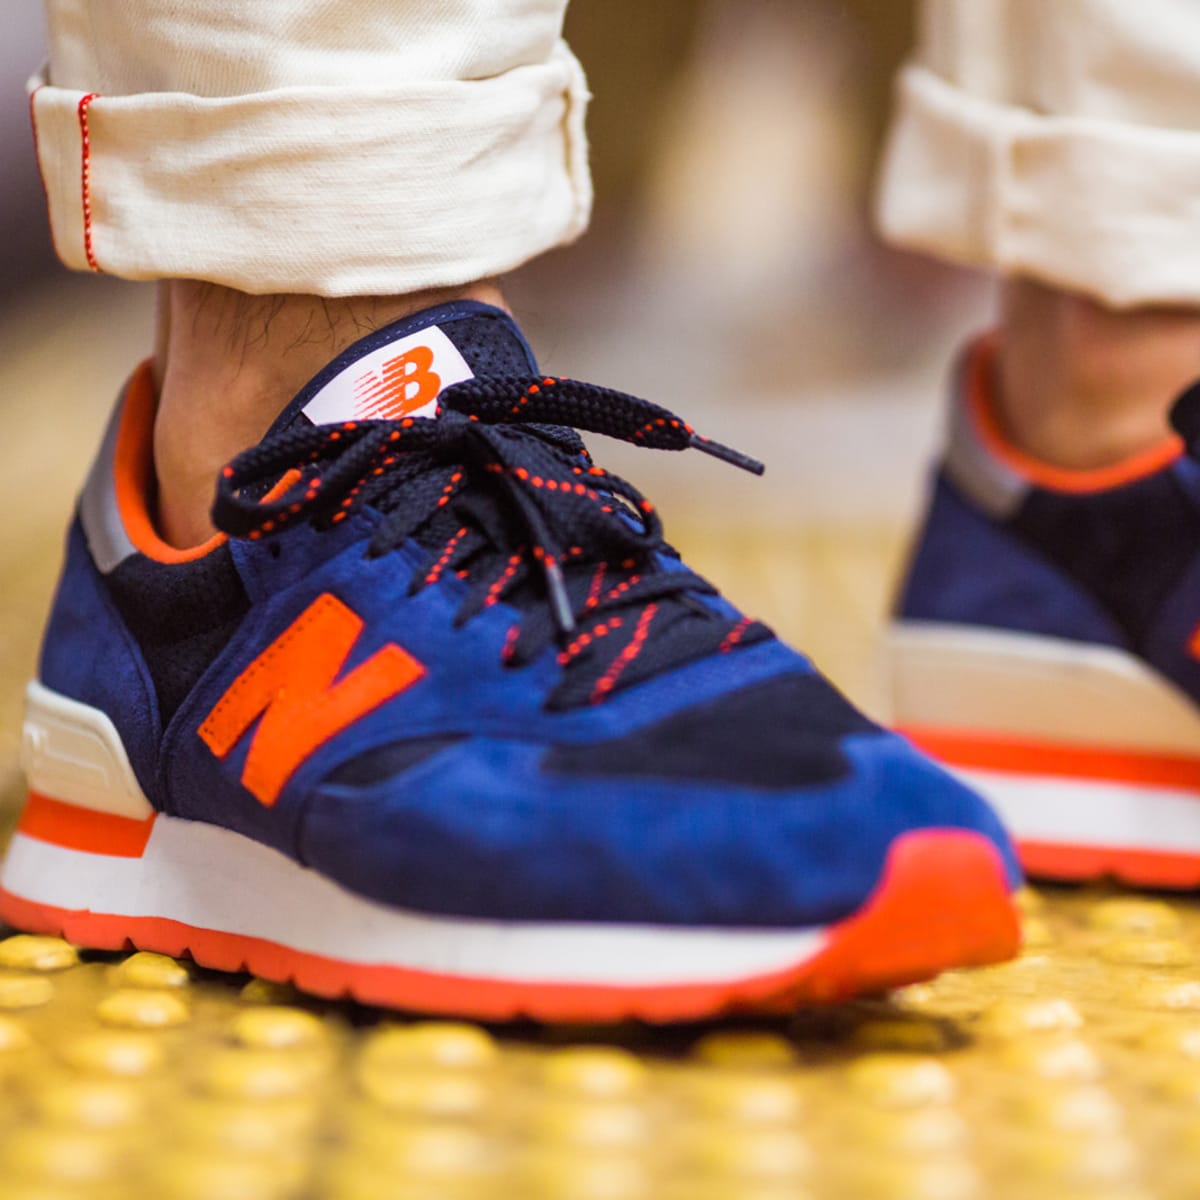 Bleed waterproof physicist The J.Crew x New Balance 990 V.1 Pack - Acquire